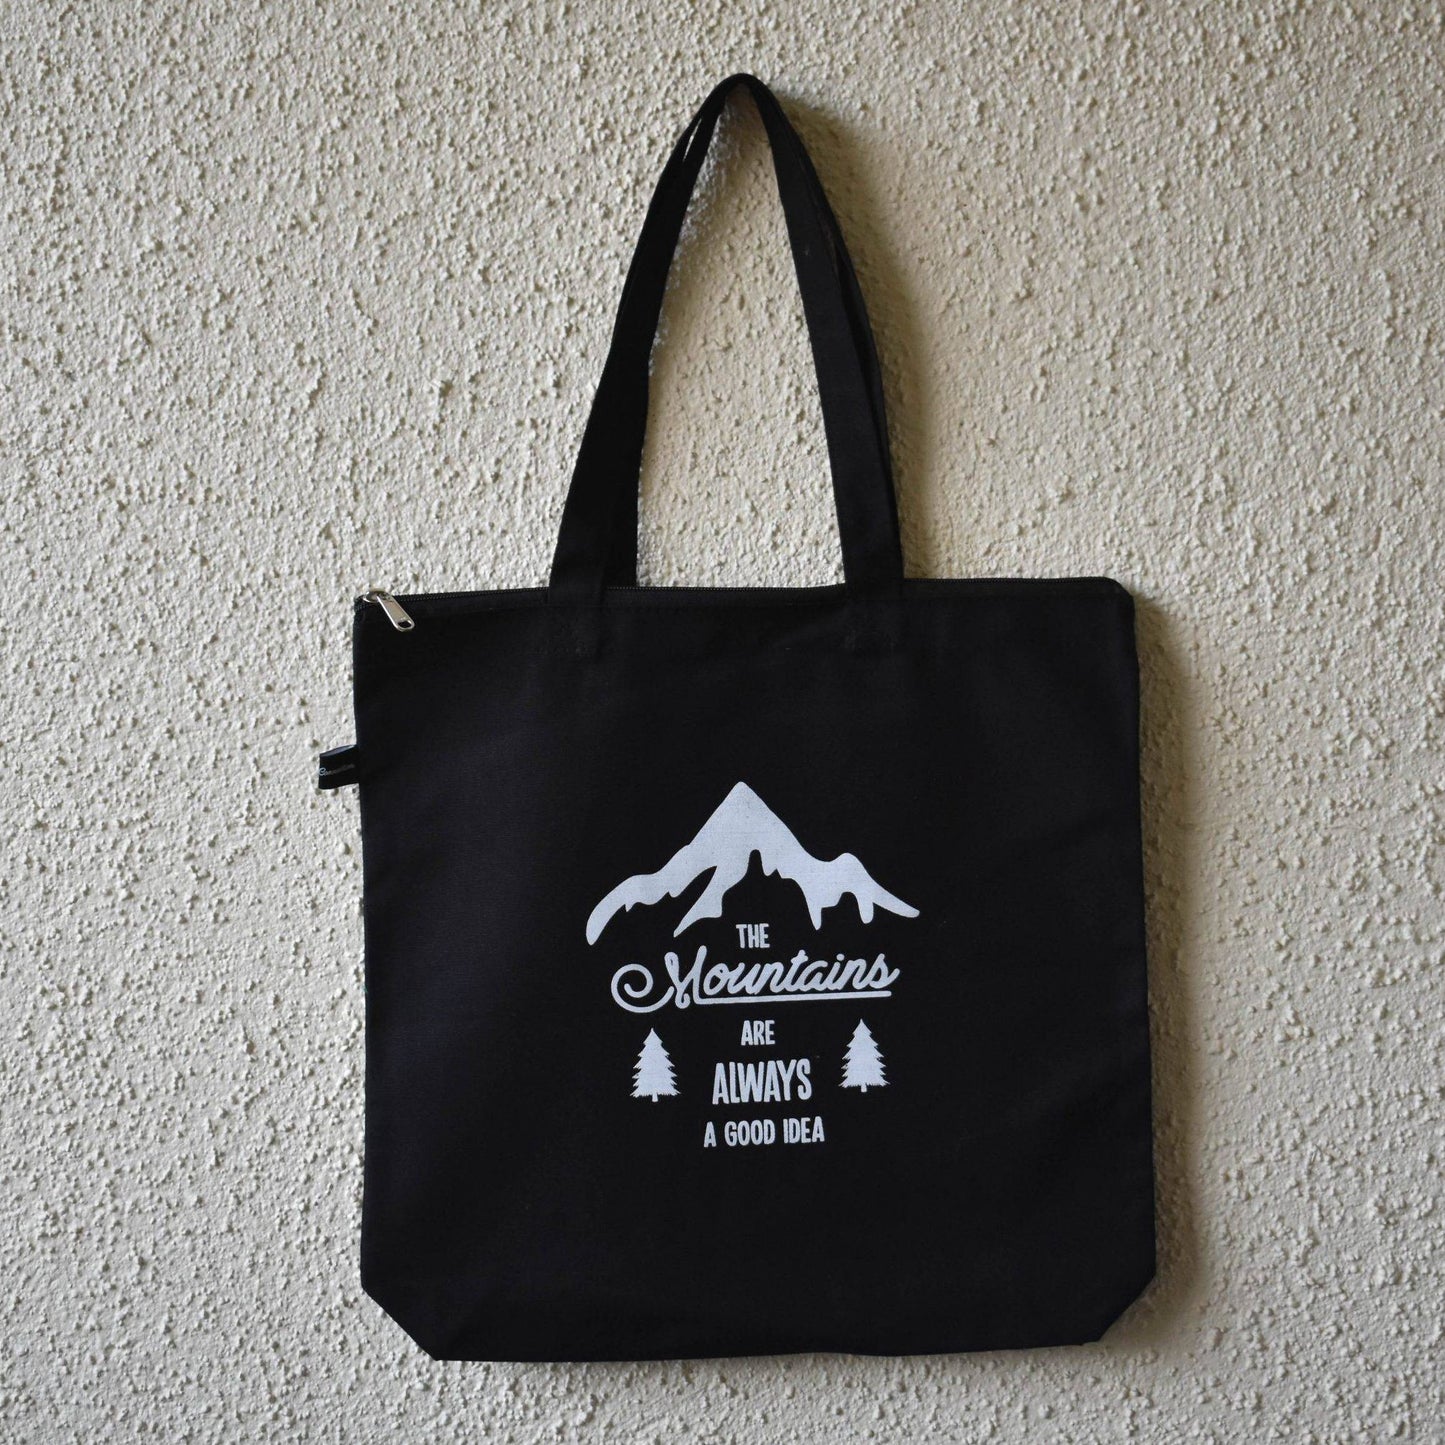 The Mountains are Always a Good Idea black canvas tote